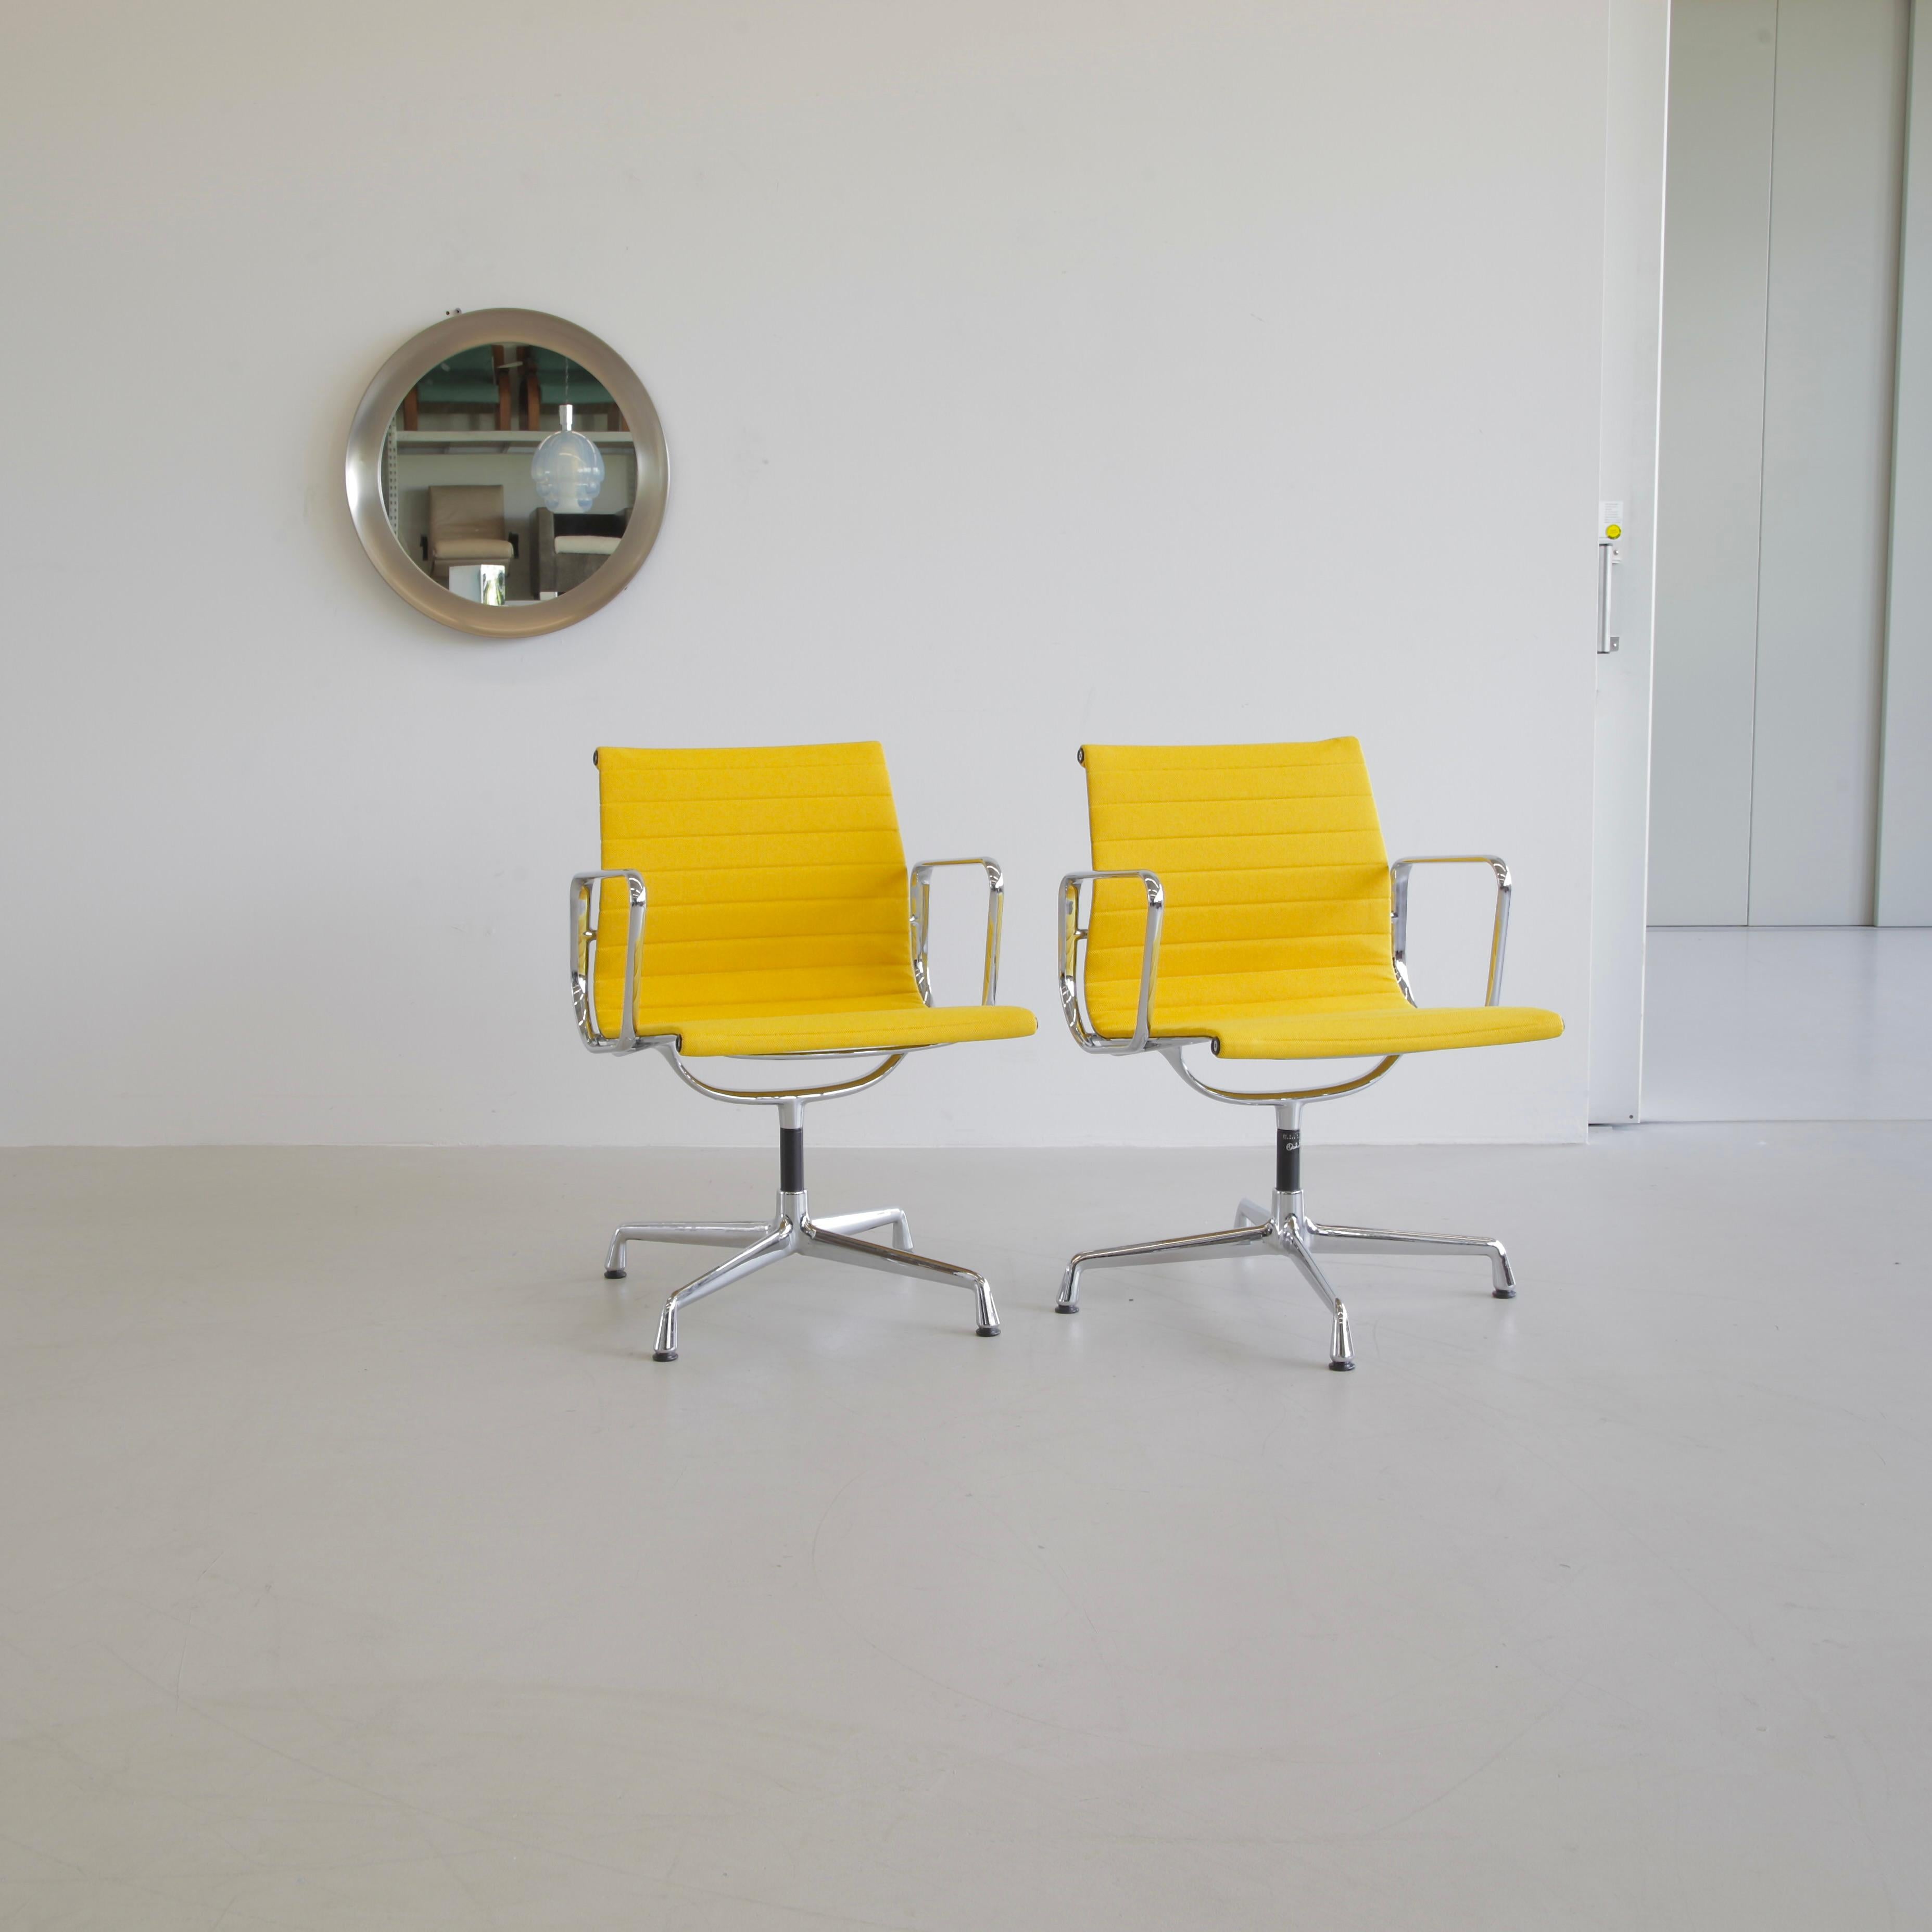 Aluminium office chairs, designed by Charles and Ray Eames. Germany, VITRA, dates vary on the base.

A beautiful set of yellow hopsack and chromed aluminium rotating chairs with armrests. Best colour ever!

